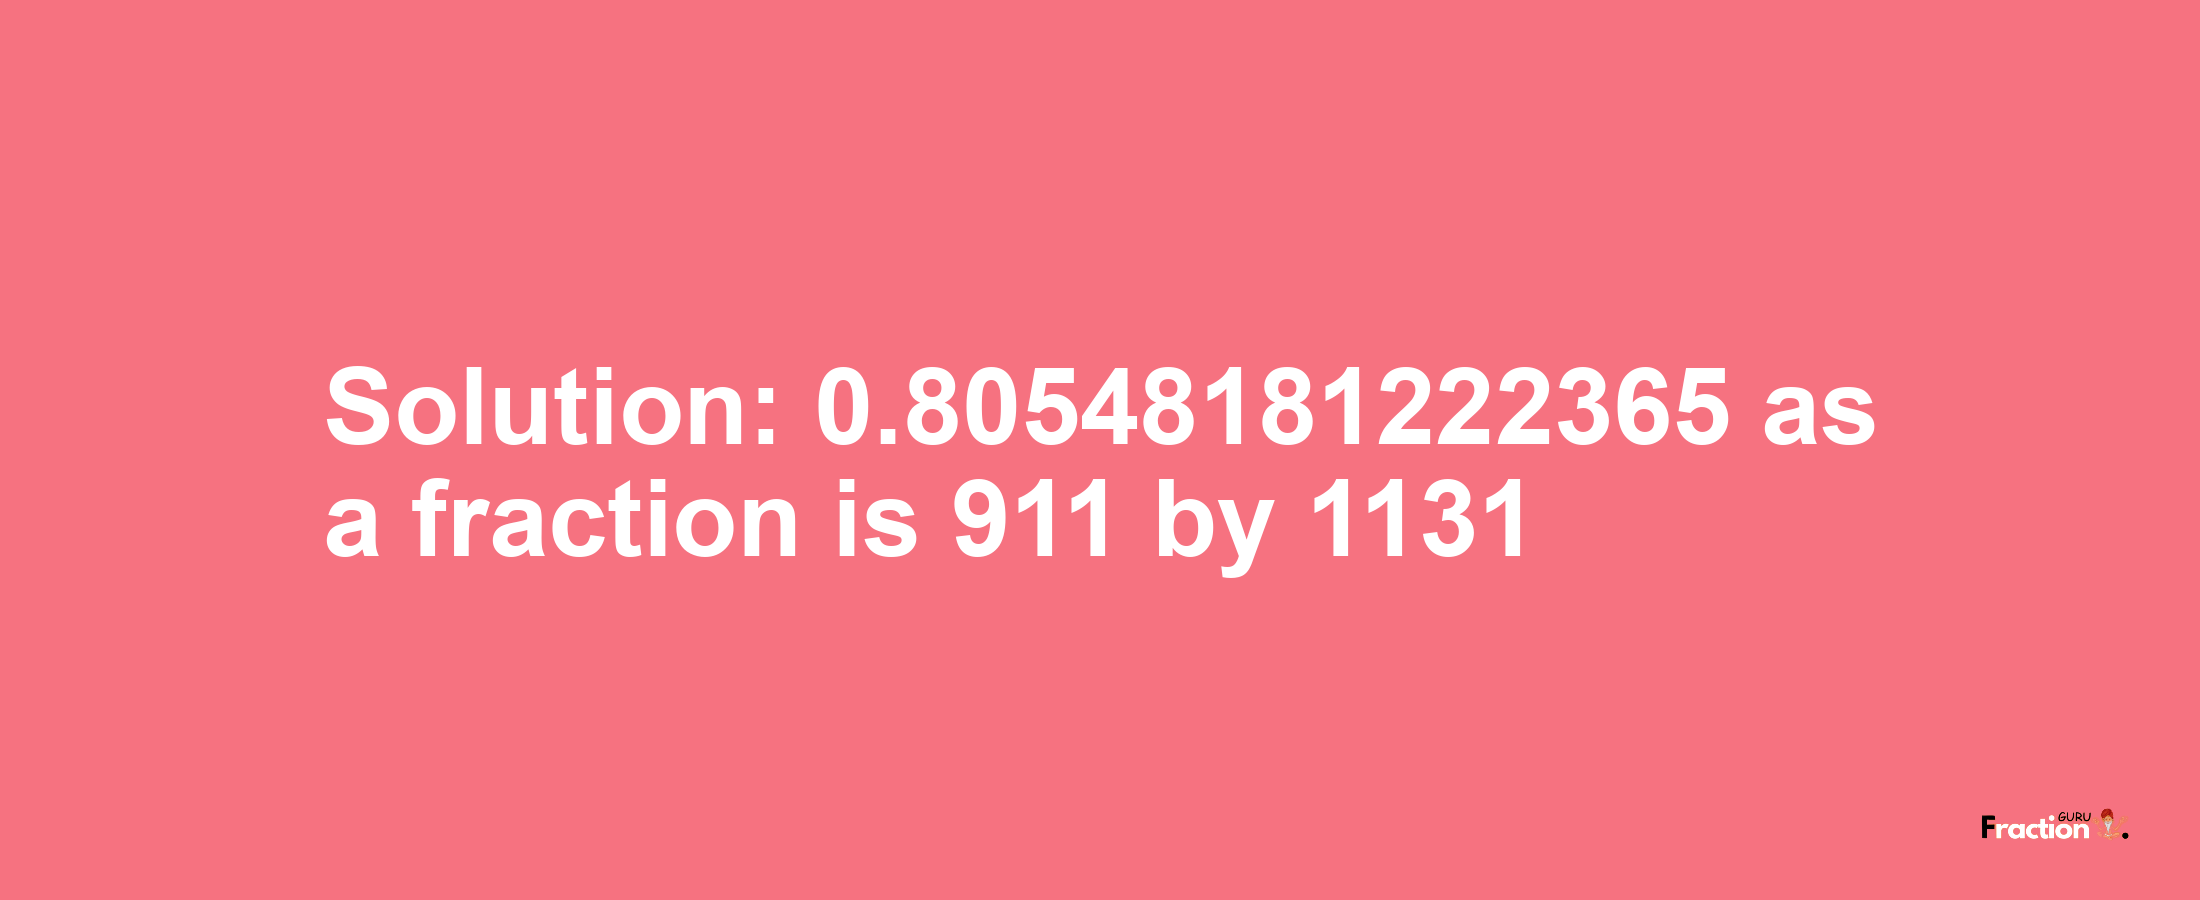 Solution:0.80548181222365 as a fraction is 911/1131